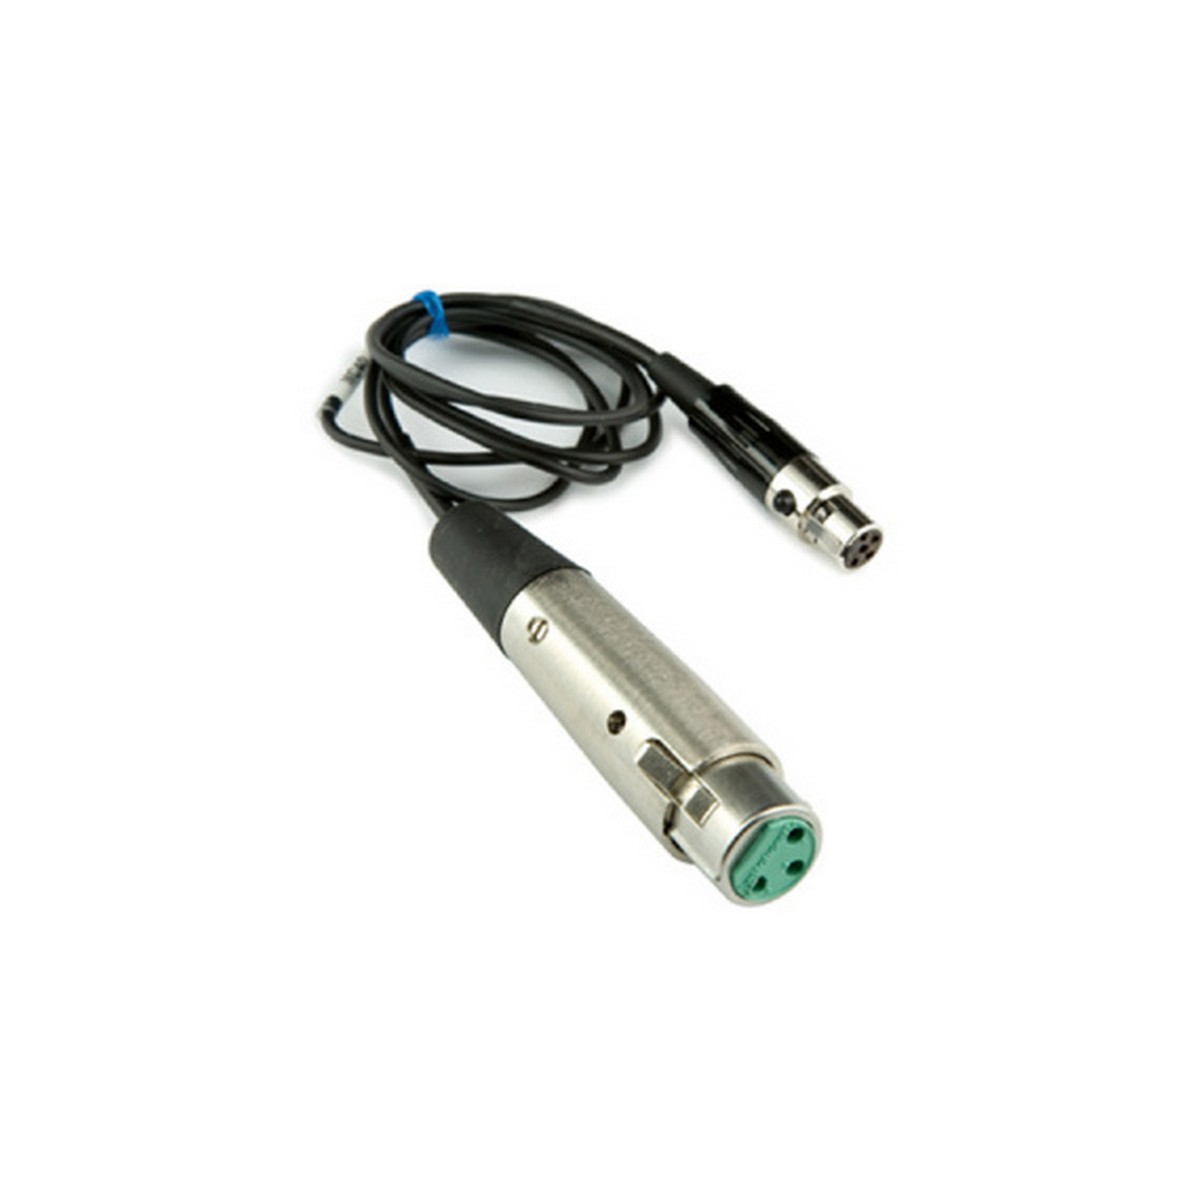 Lectrosonics MC40 XLR Female to TA5F Microphone Level Cable for Dynamic Microphone Input to Transmitters, 37-Inch